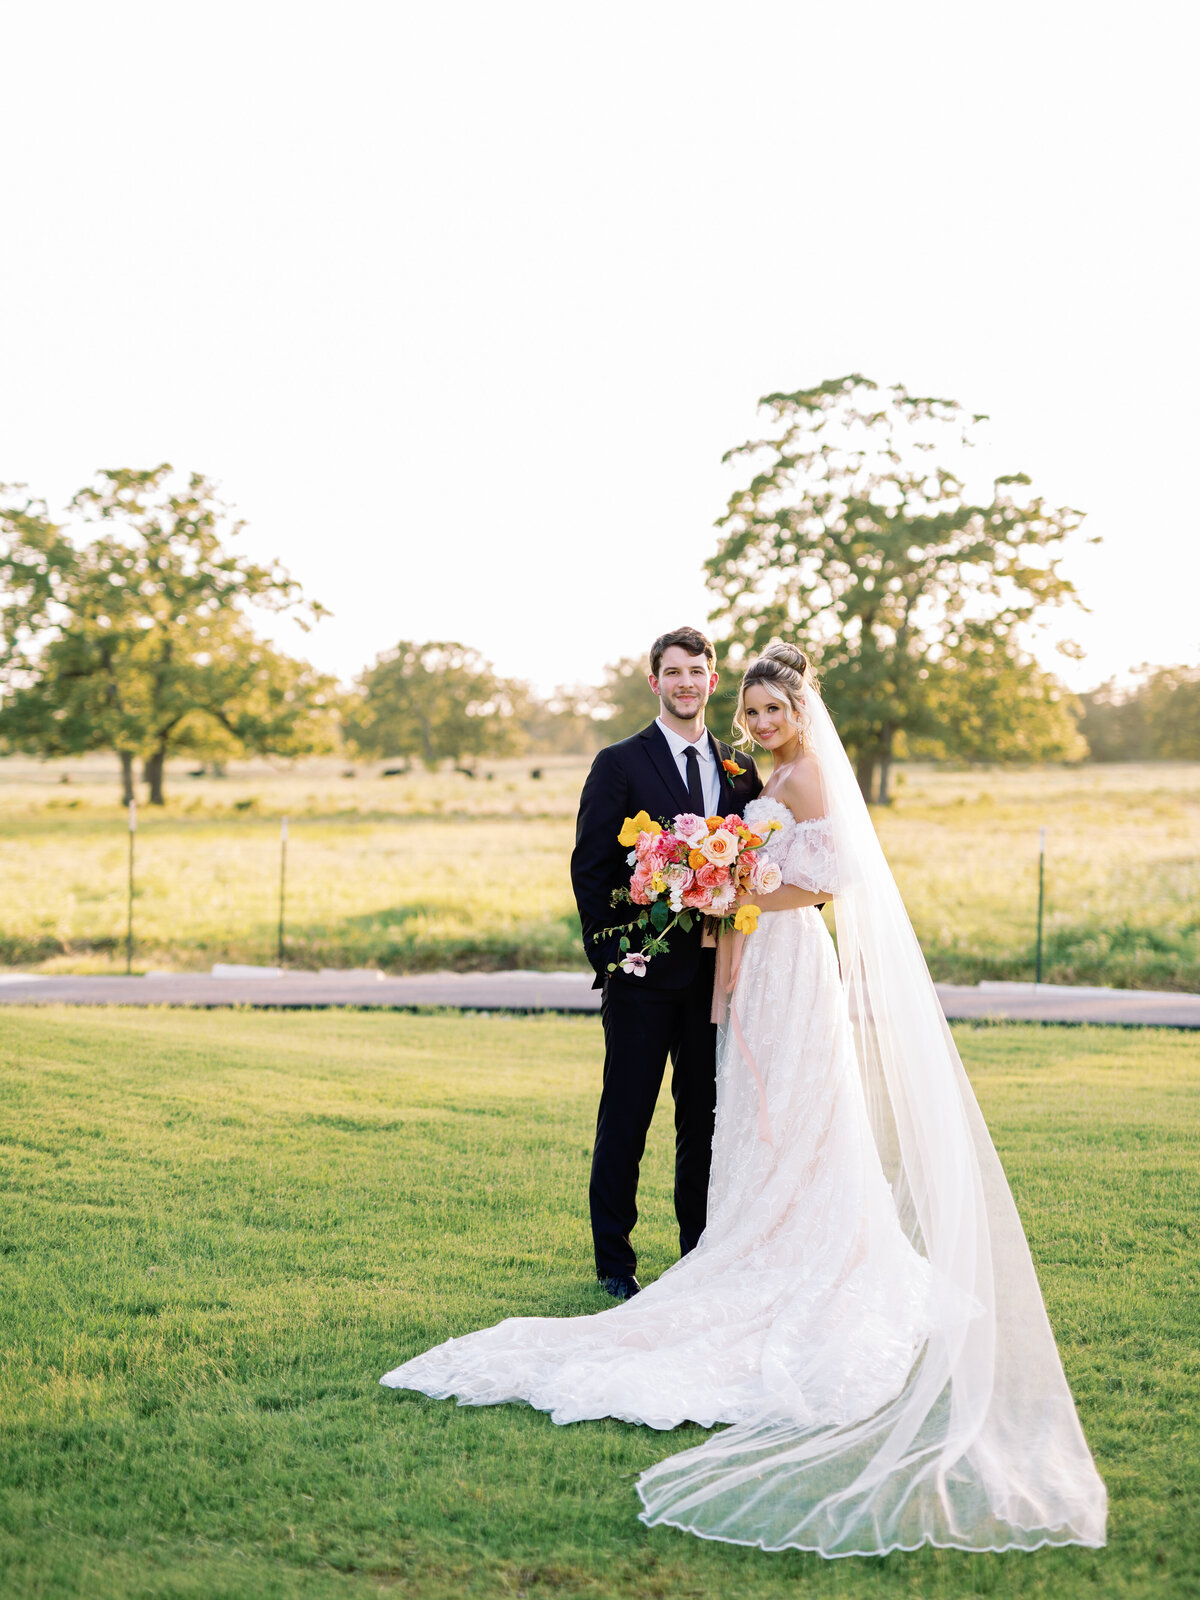 Shelby Day Photography is a wedding film photographer based in Houston & Austin, Texas. Her style is true to life, authentic, and joyful. Through her personalized approach, she effortlessly captures the real and raw emotions of your special day.